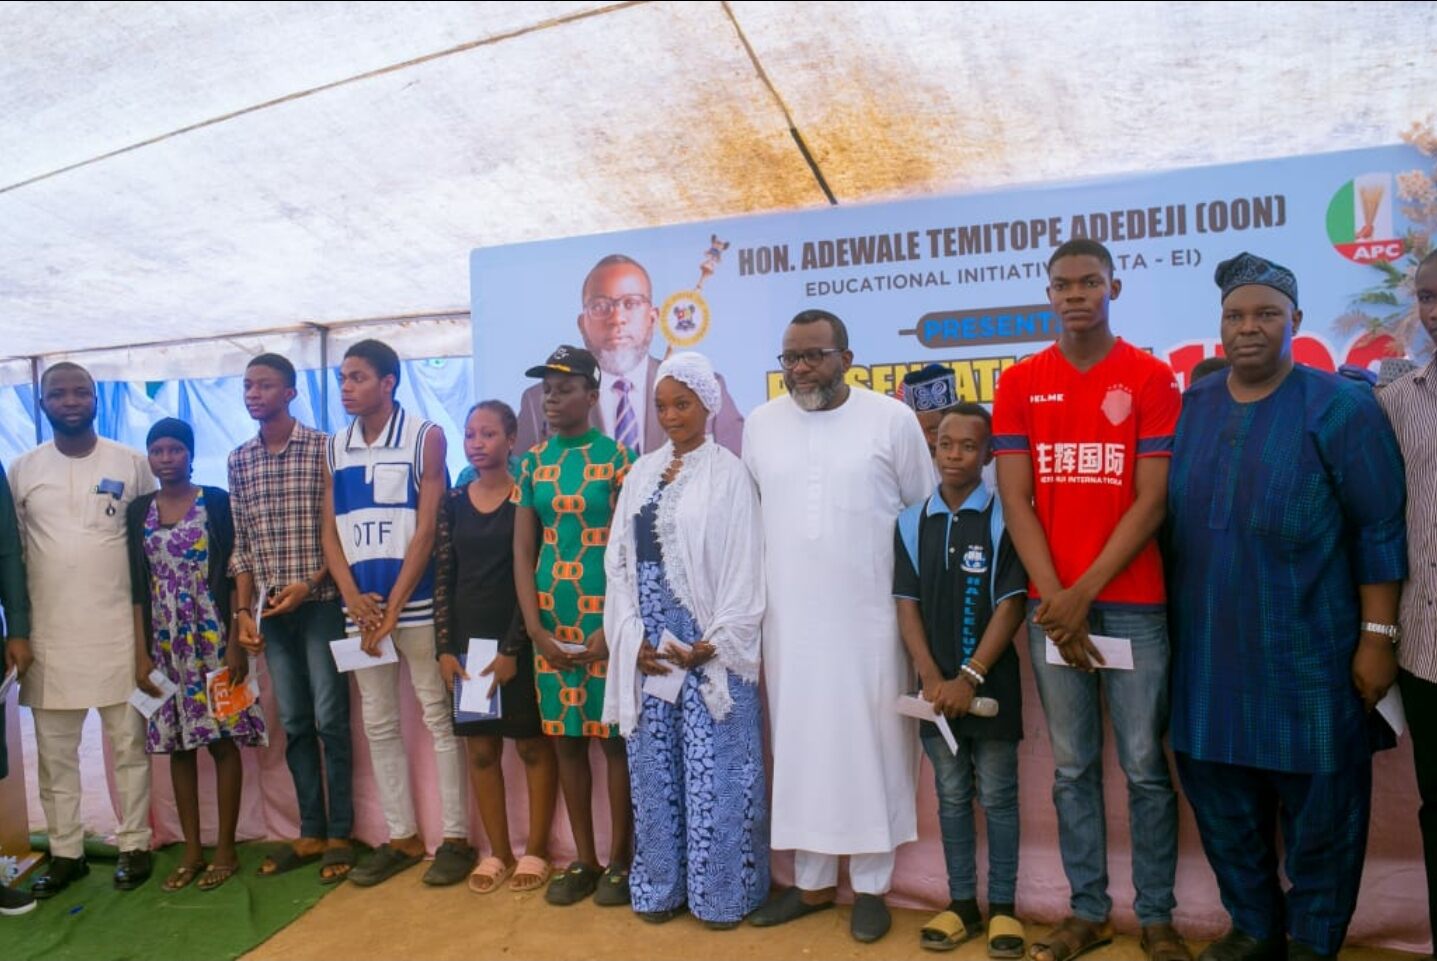 Ifako-Ijaiye 1 lawmaker, Hon. Adewale Adedeji with some of the beneficiaries of the UTME forms